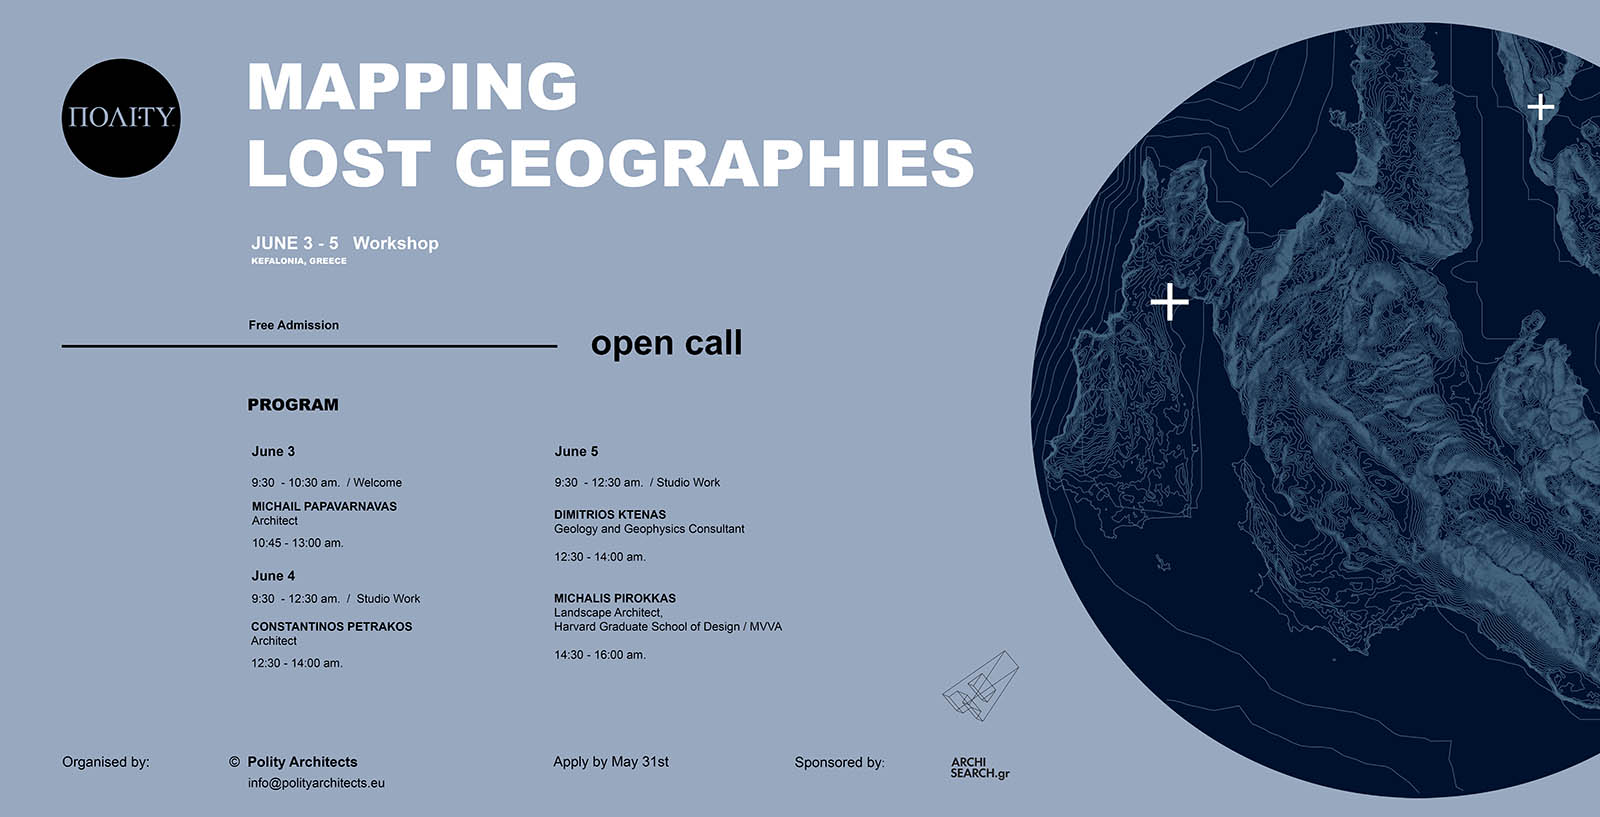 Archisearch Mapping Lost Geographies Workshop |  June 3-5, Kefalonia